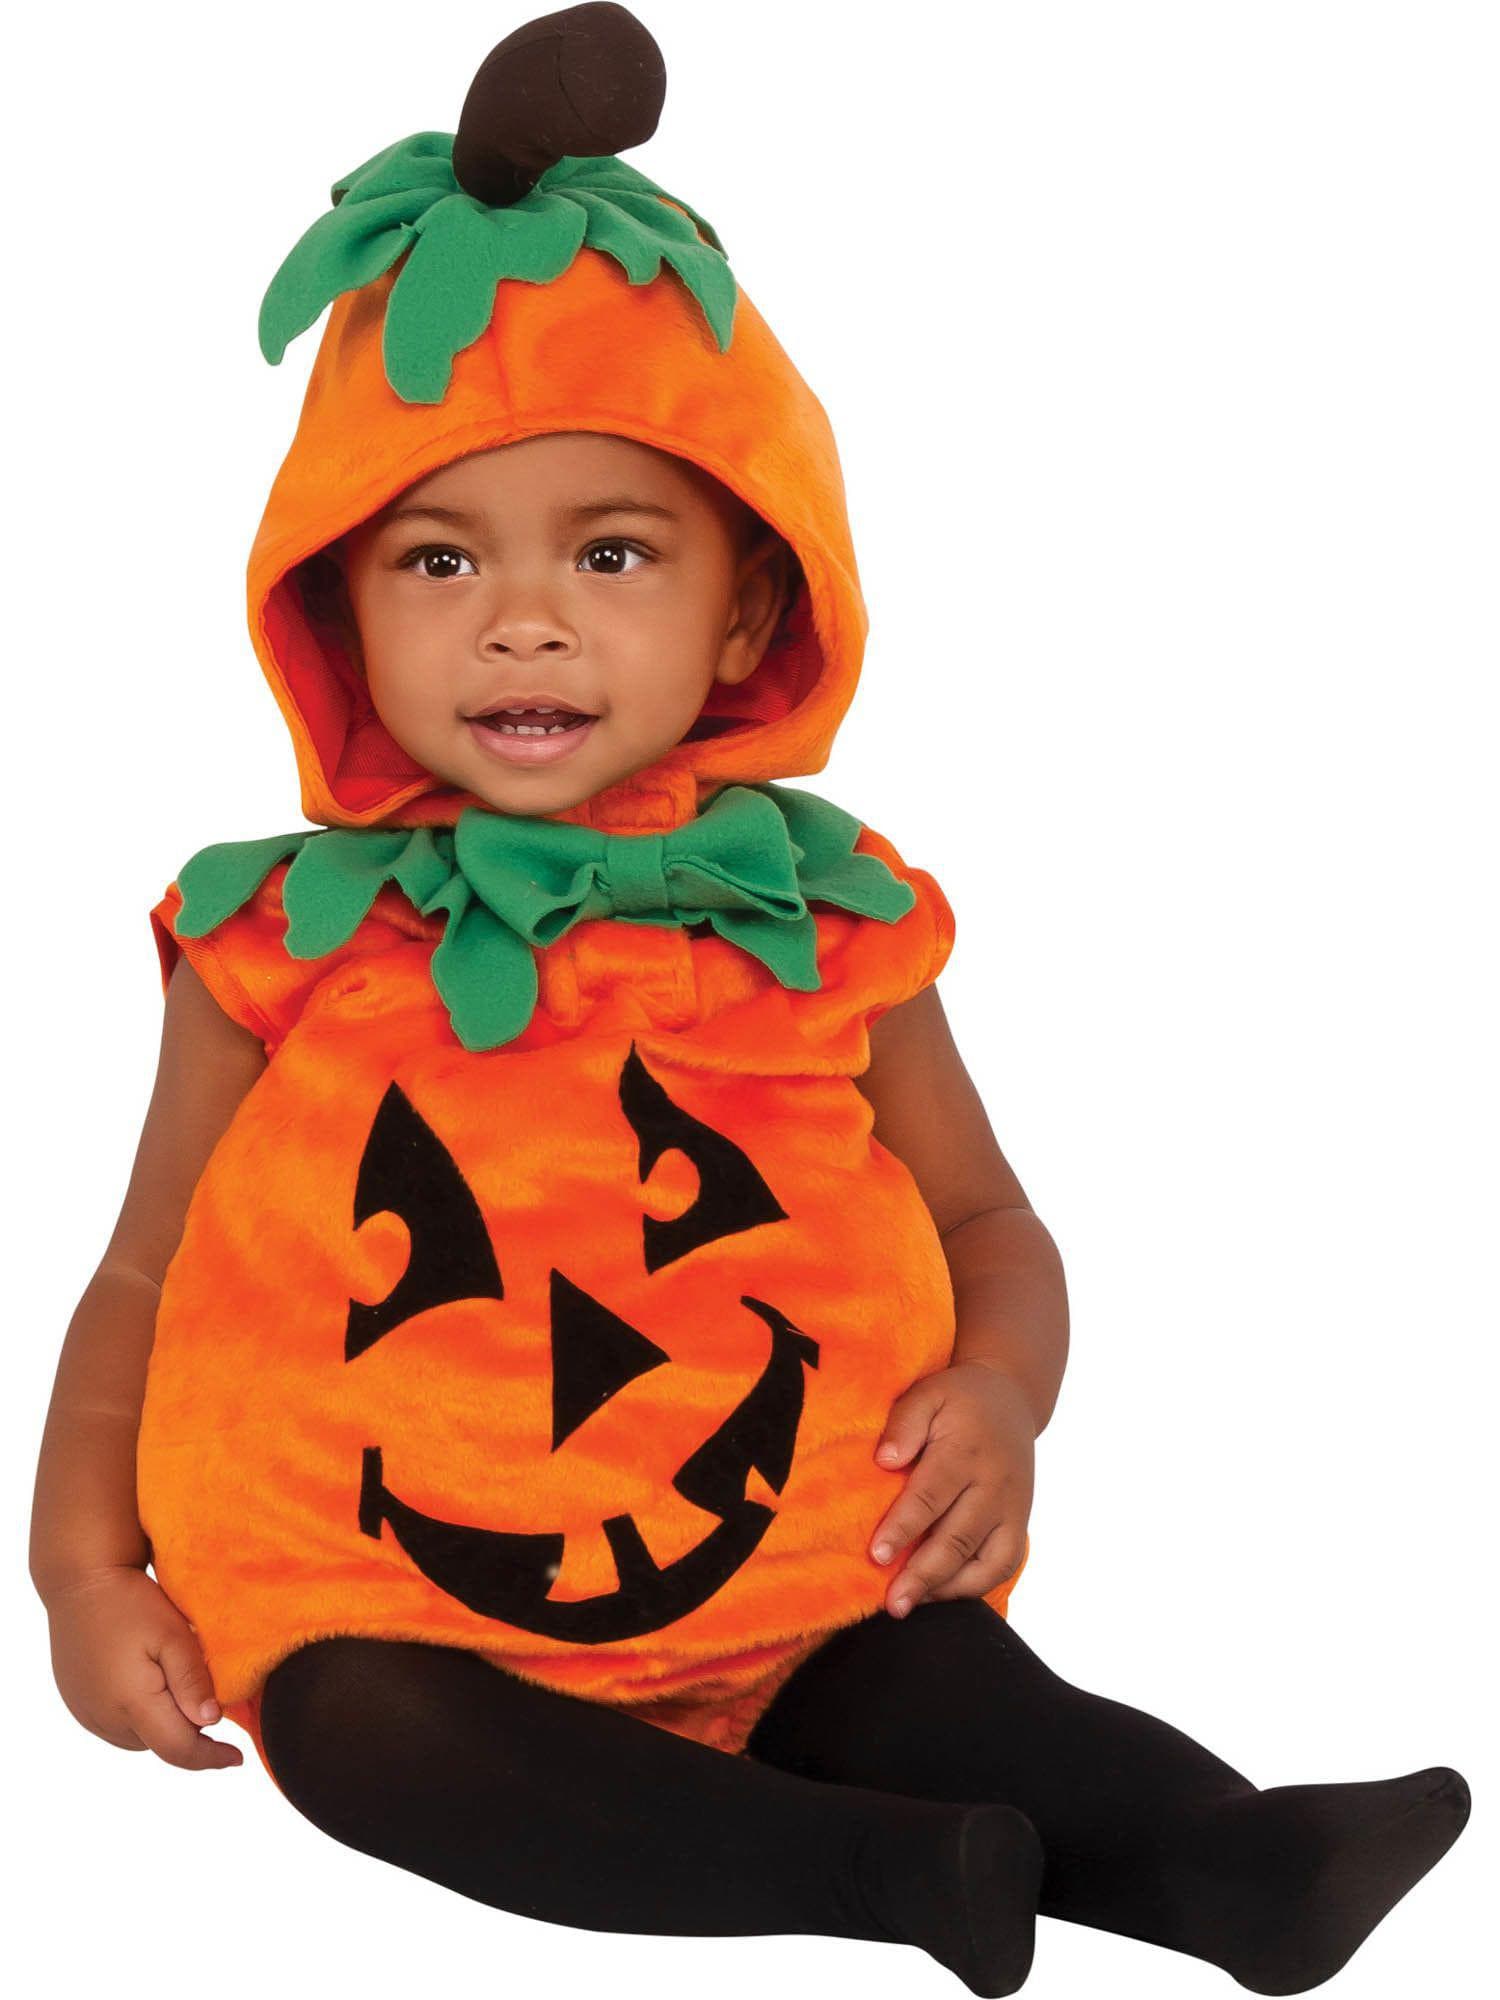 Baby/Toddler Lil Pumpkin Costume - costumes.com